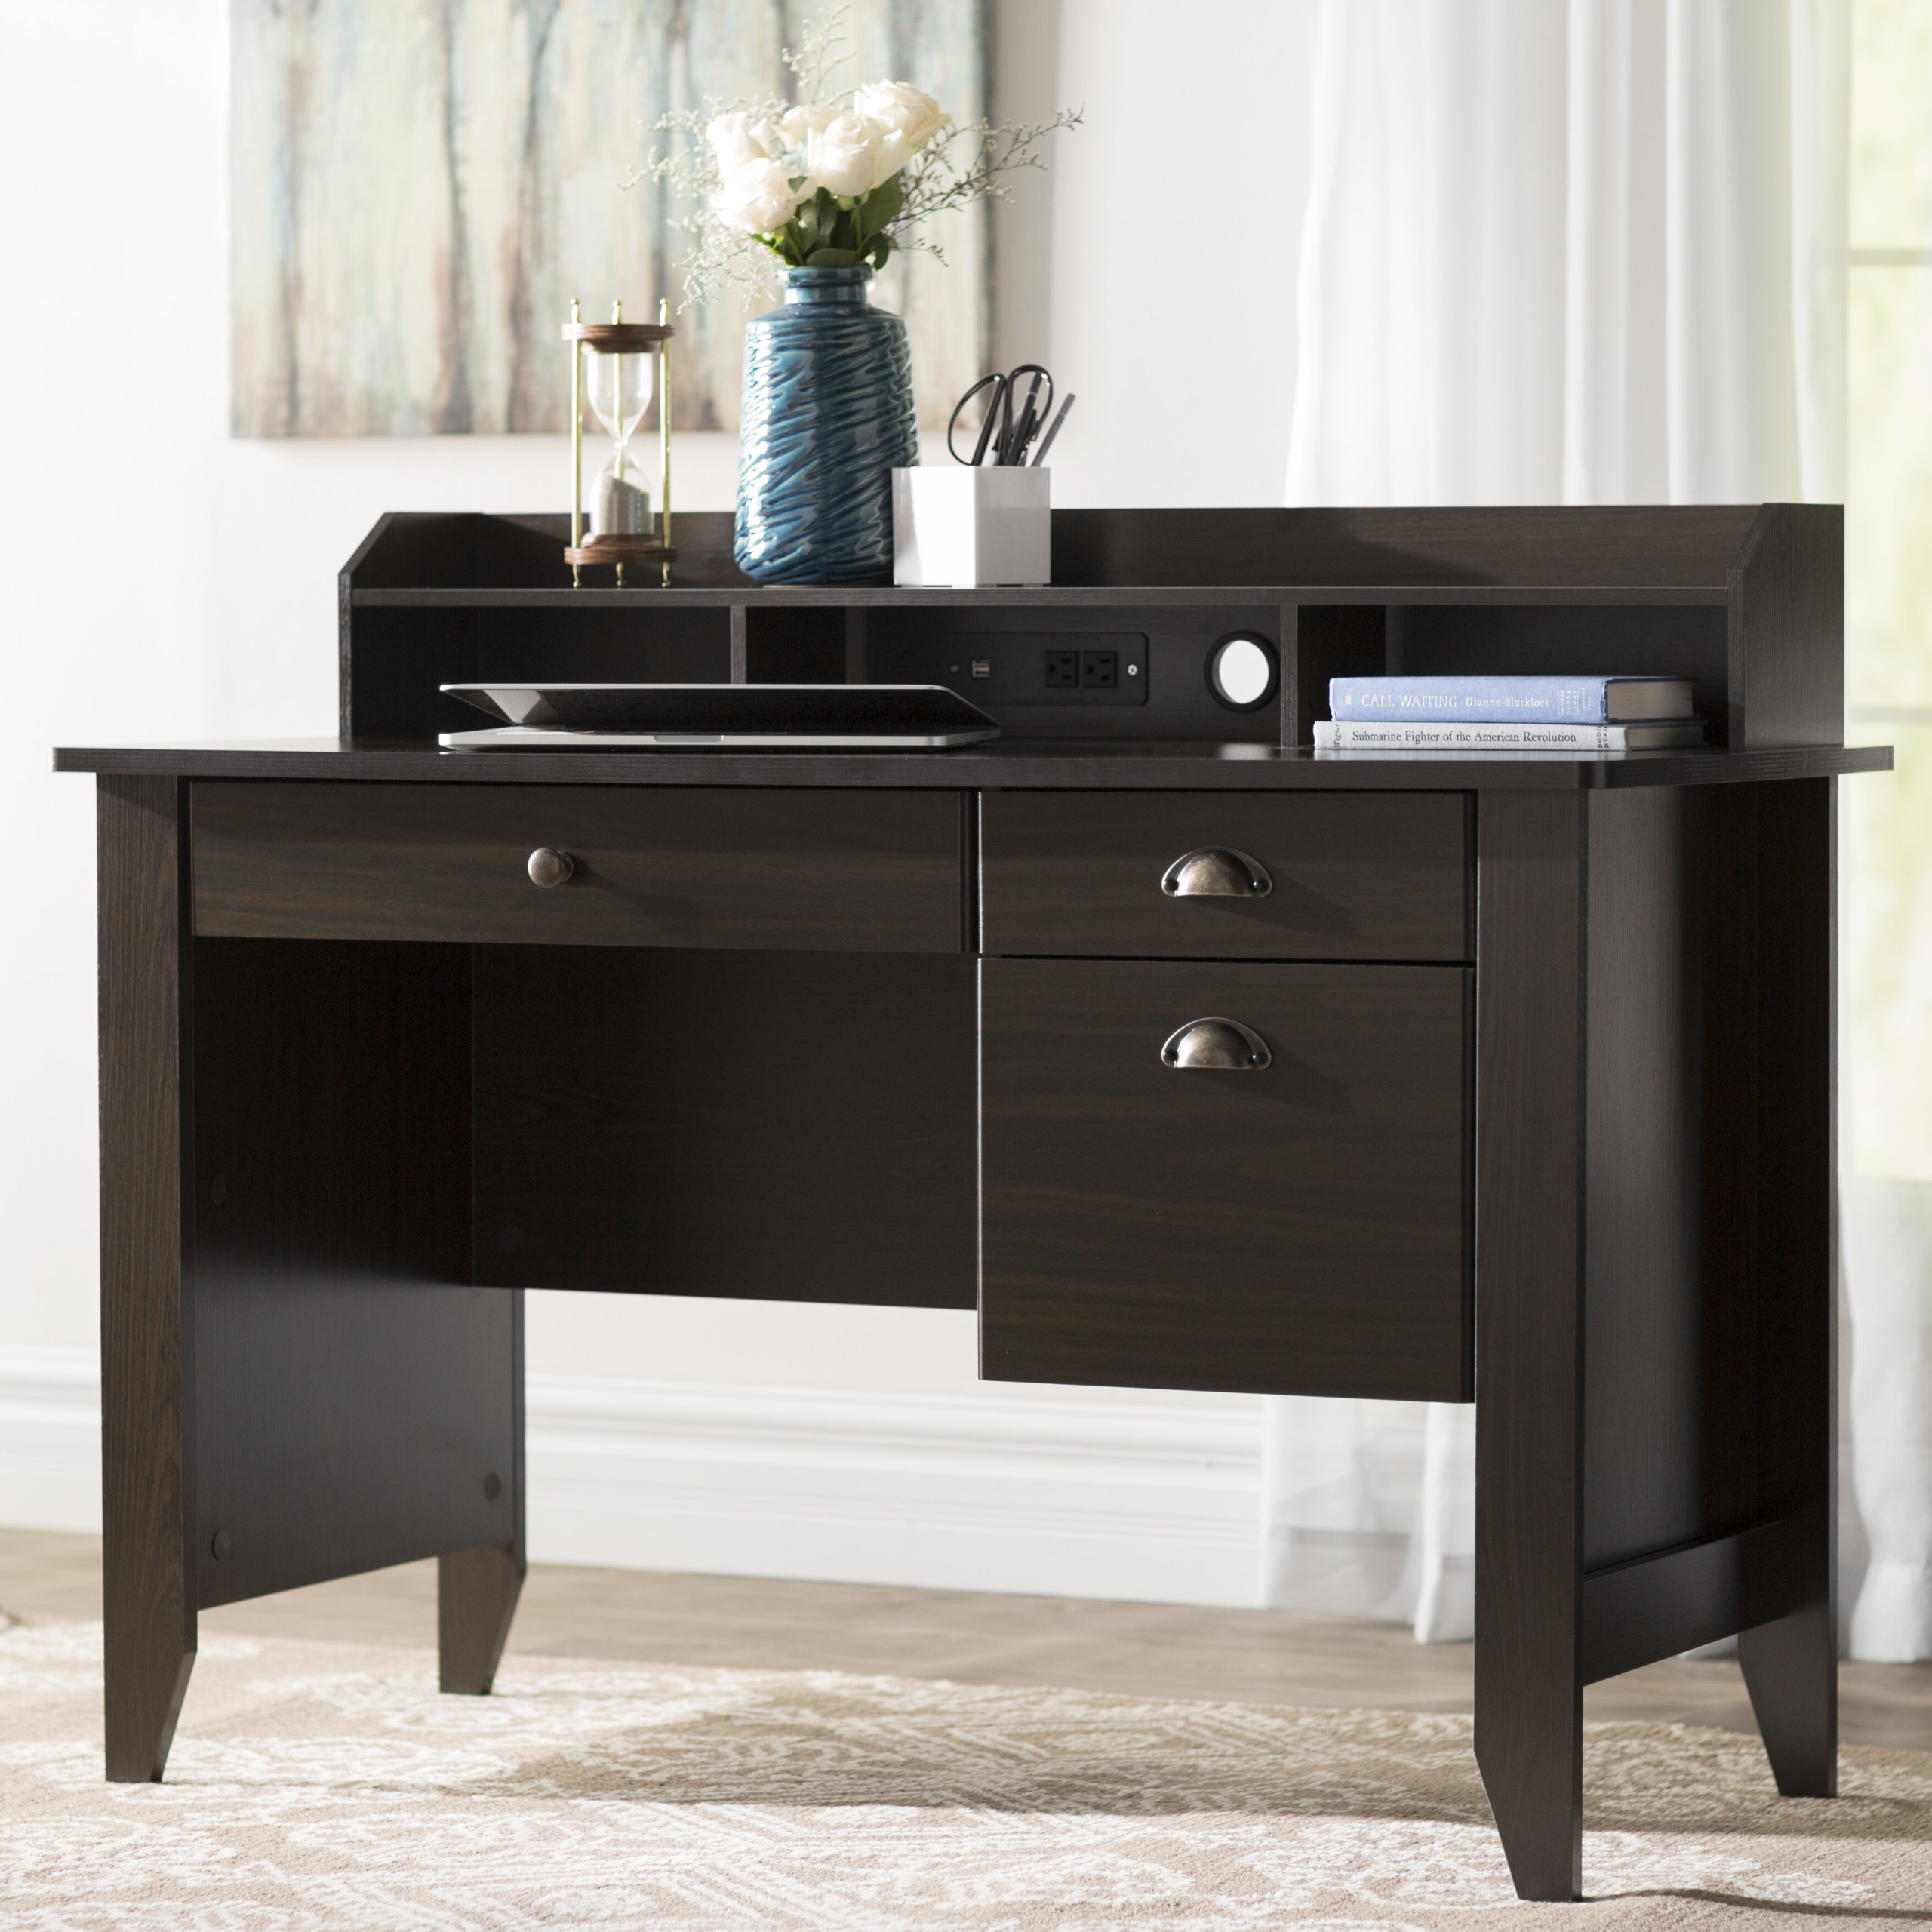 50+ Computer Desk with Hutch You'll Love in 2020 - Visual Hunt